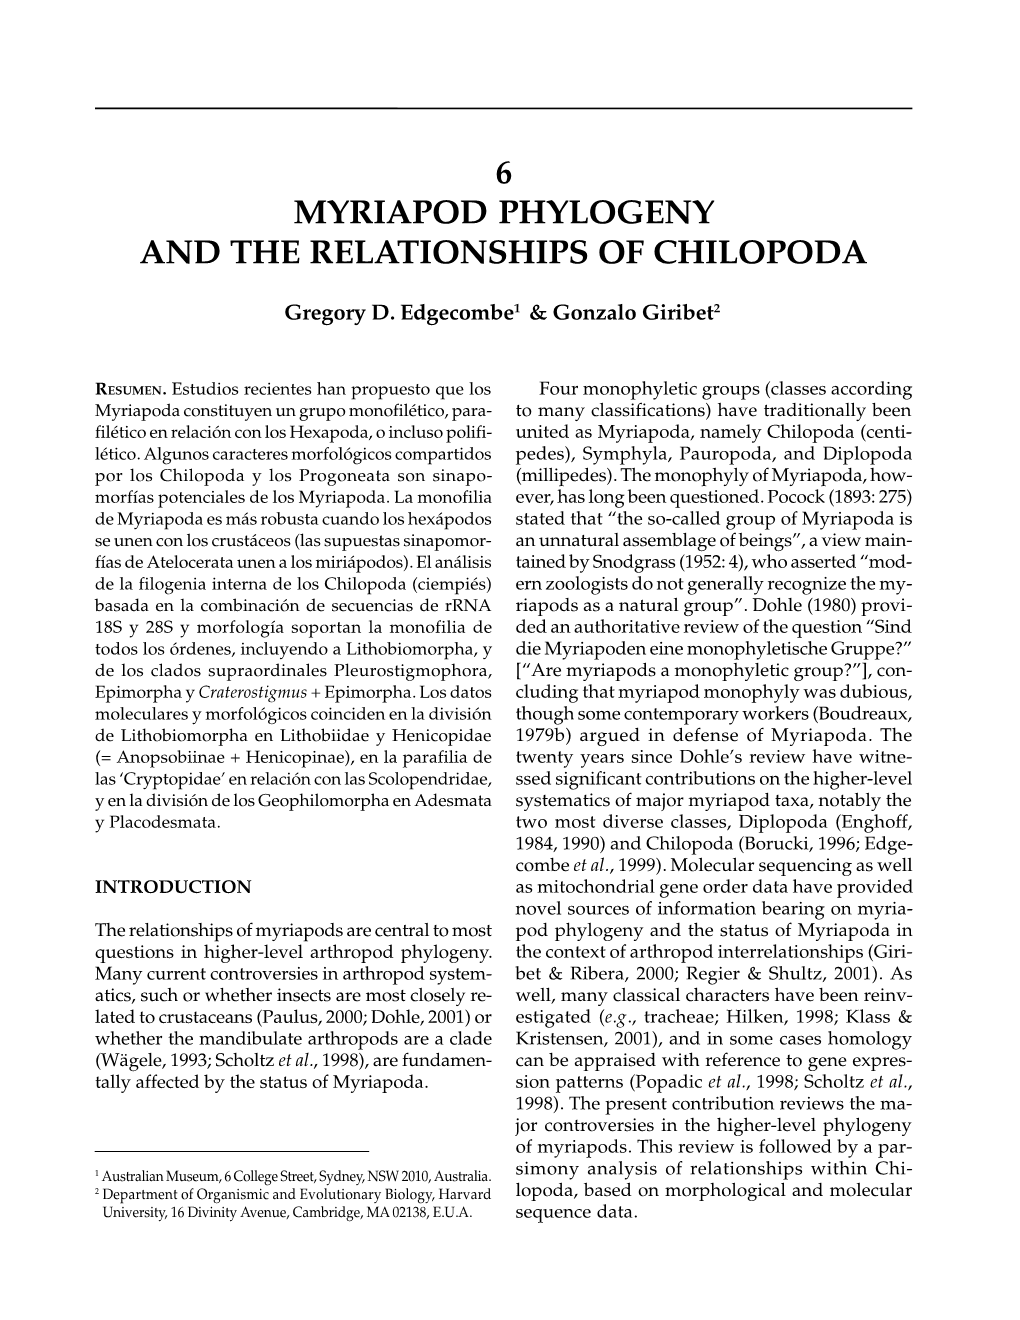 6 Myriapod Phylogeny and the Relationships of Chilopoda